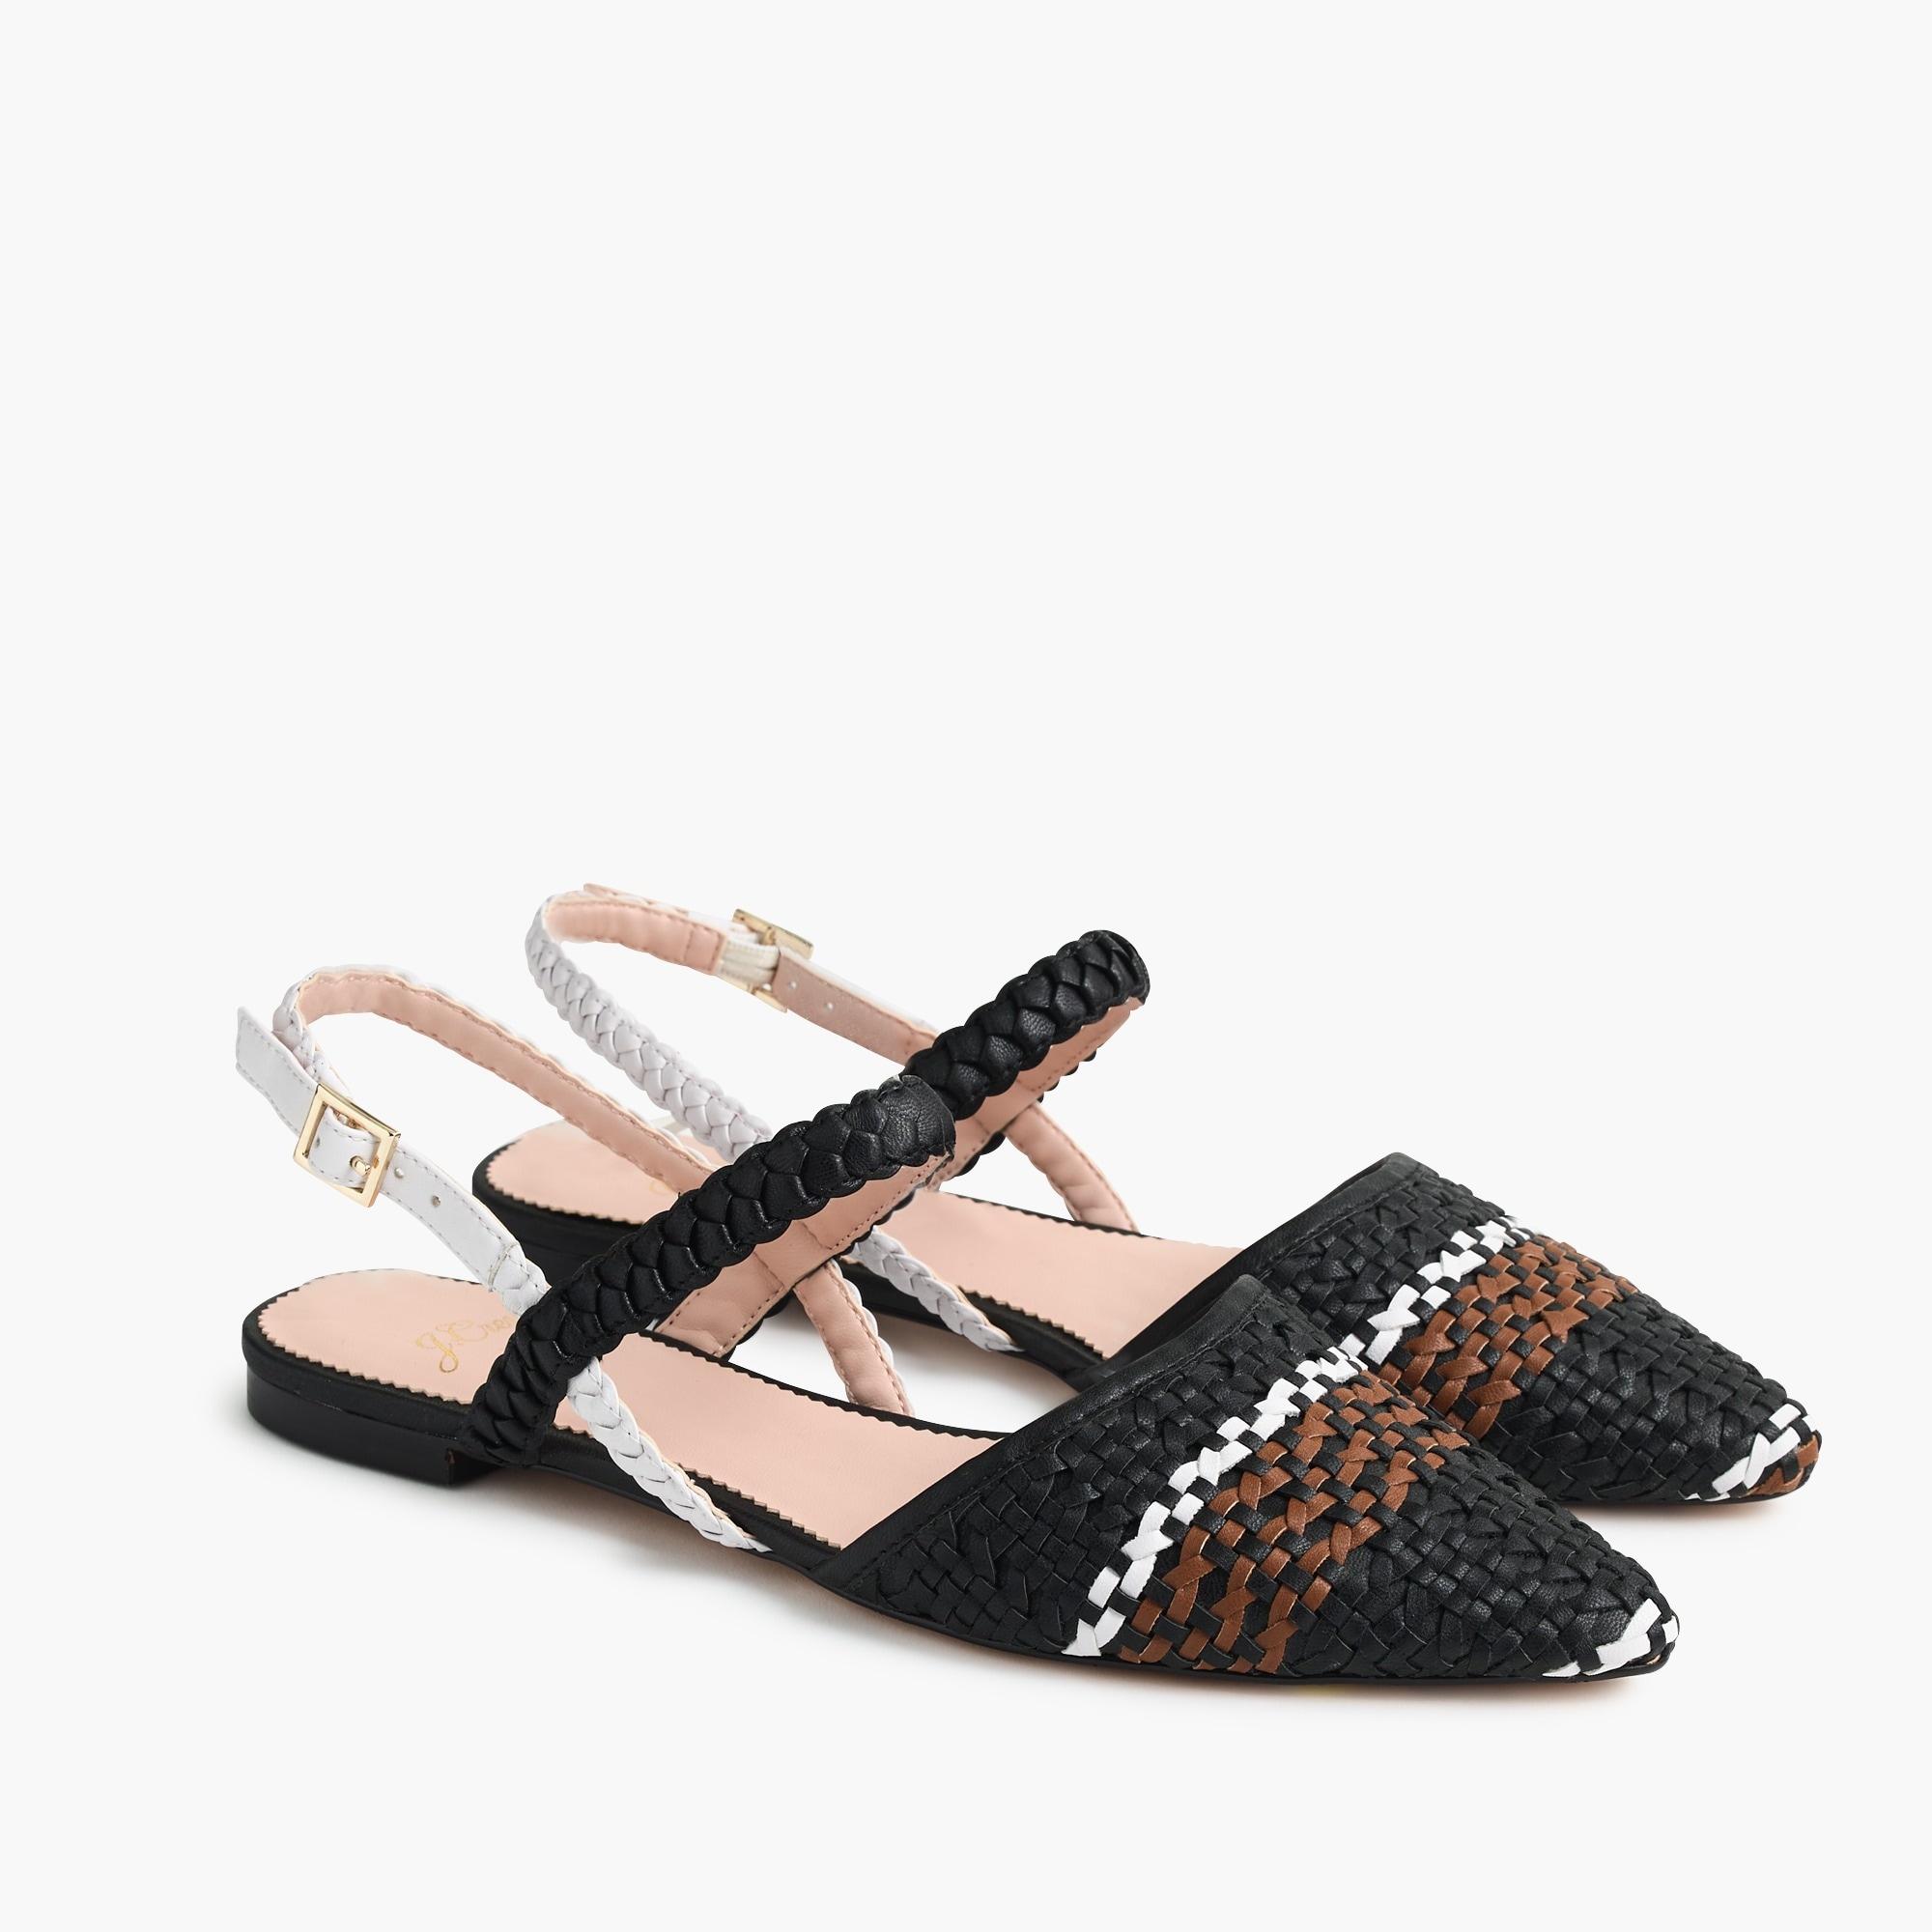 J.Crew Pointed-toe Woven Flats With Ankle Strap in Black - Lyst